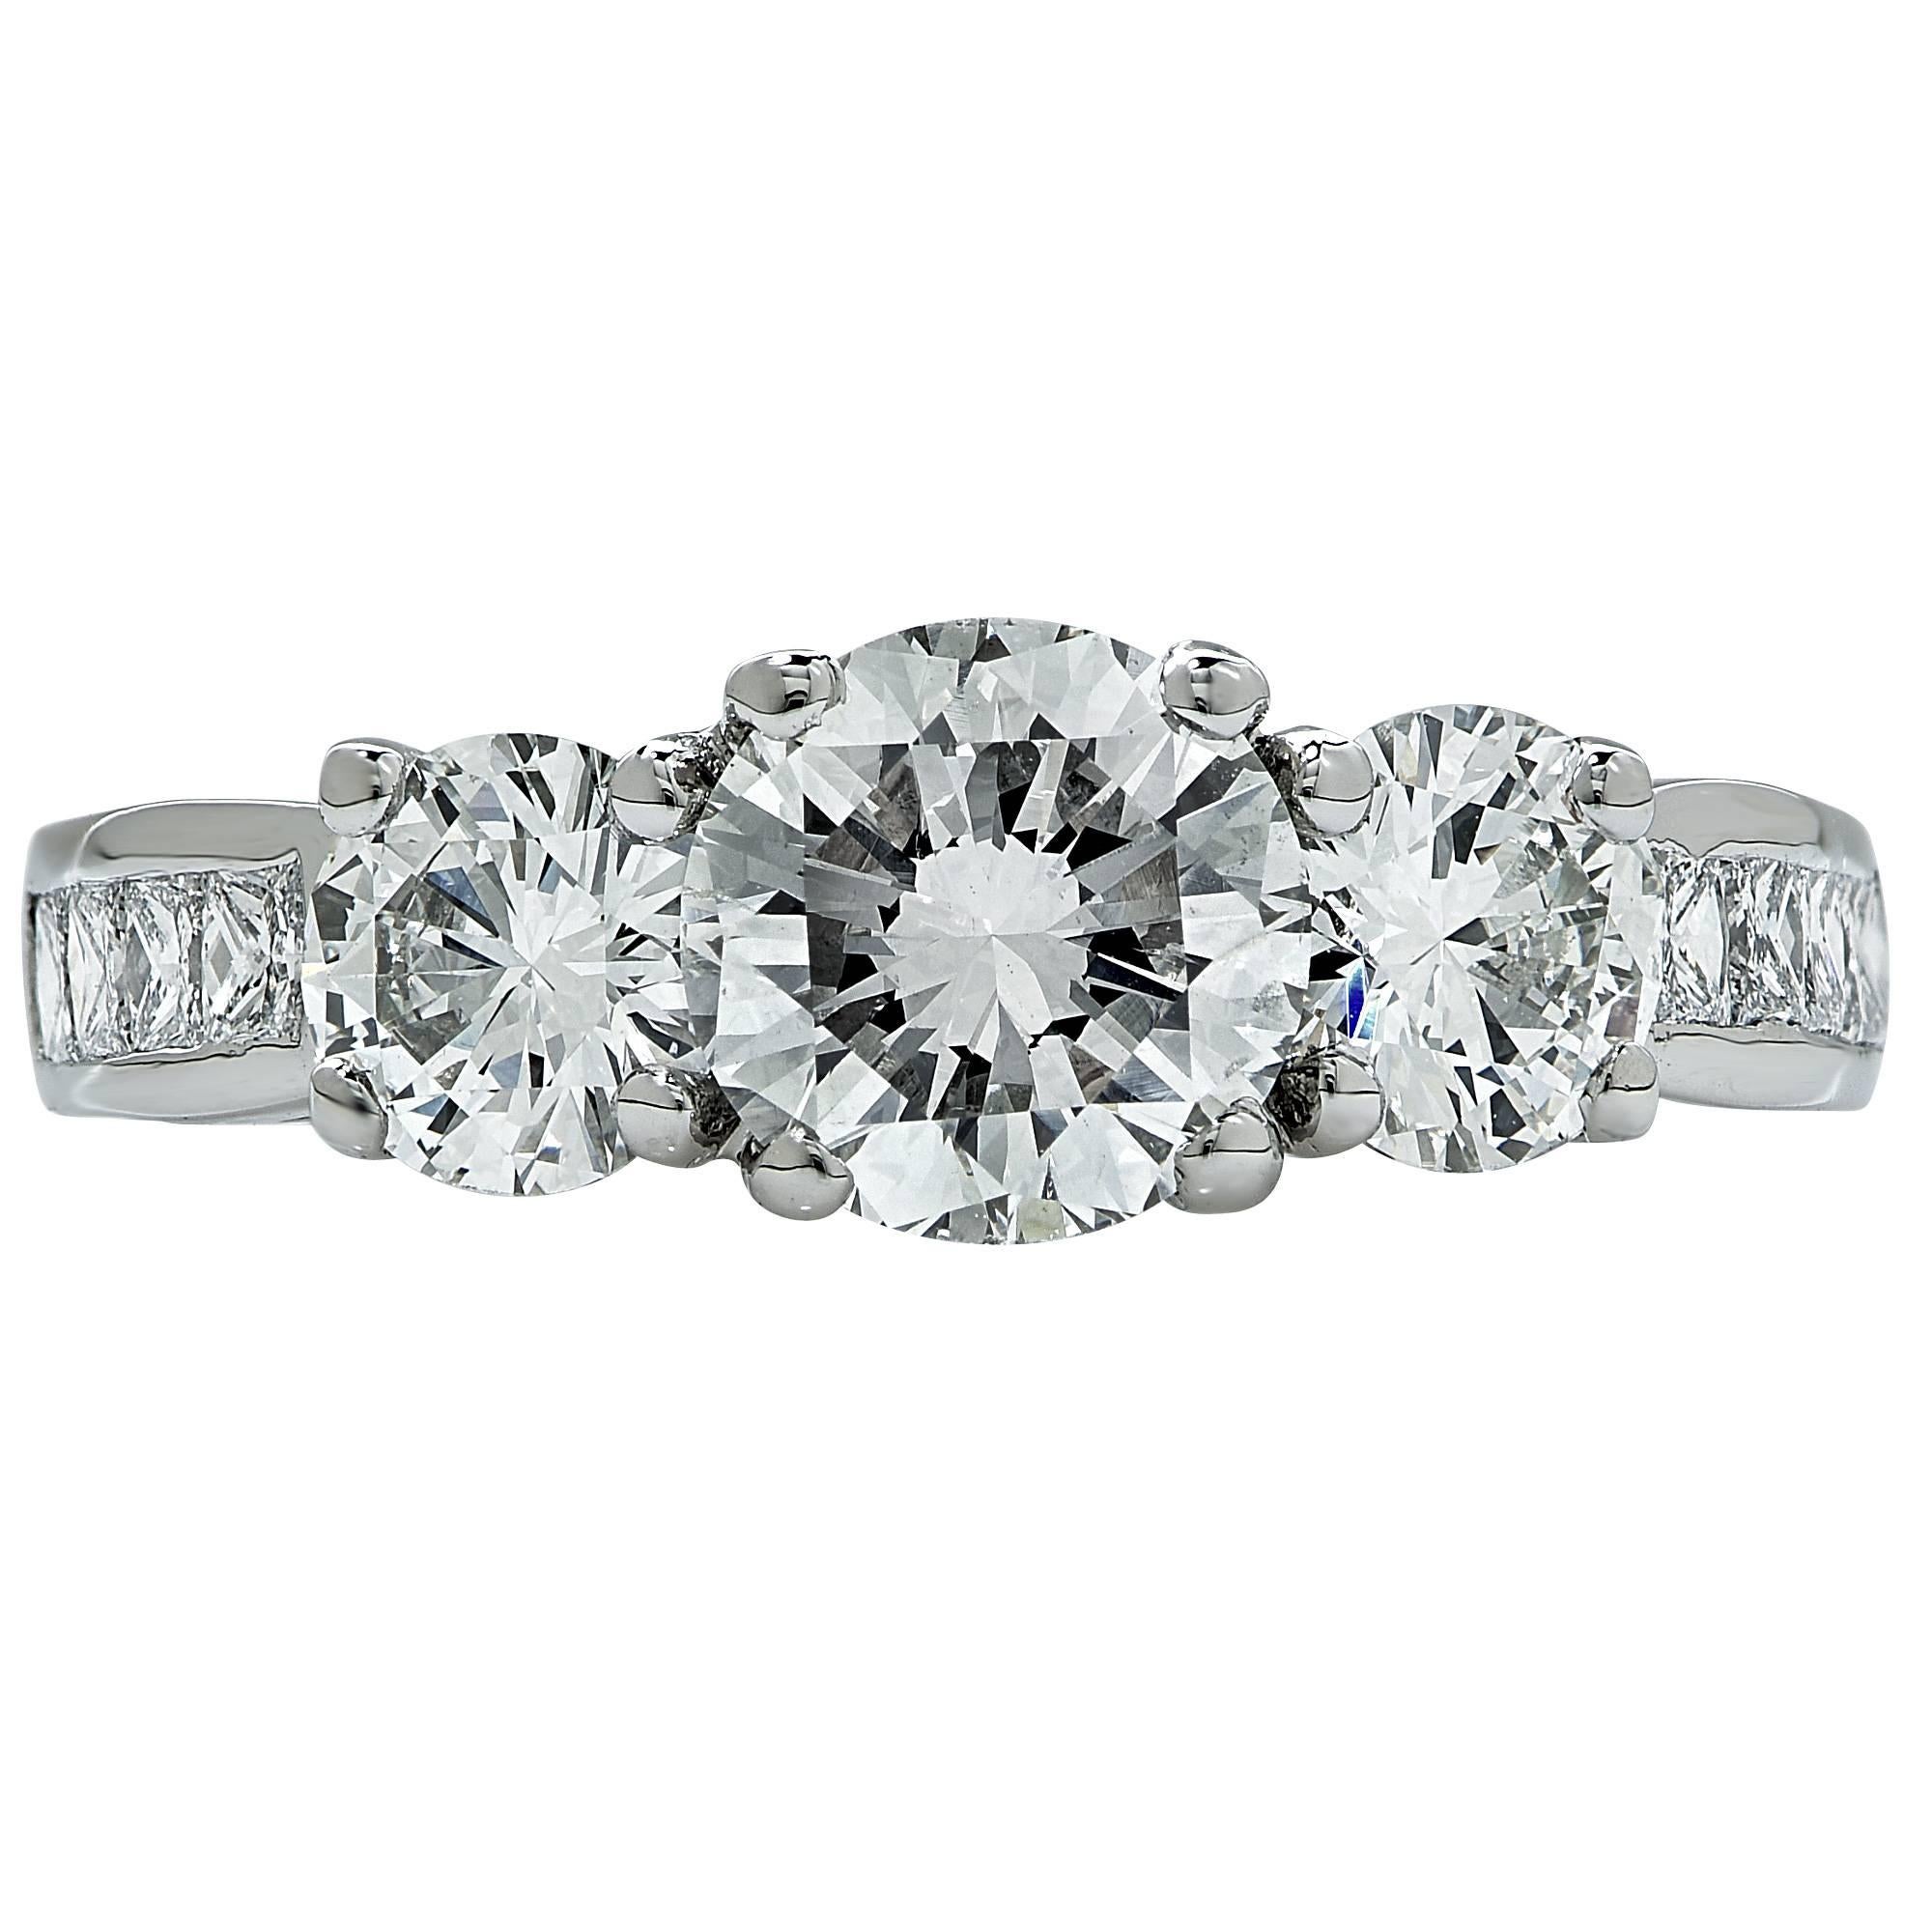 Platinum engagement ring features a 1.06ct H SI1 round brilliant cut diamond flanked by 2 round brilliant cut diamonds weighing .80cts H color and VS clarity. The ring also is accented by 8 princess cut diamonds weighing .32cts H color VS